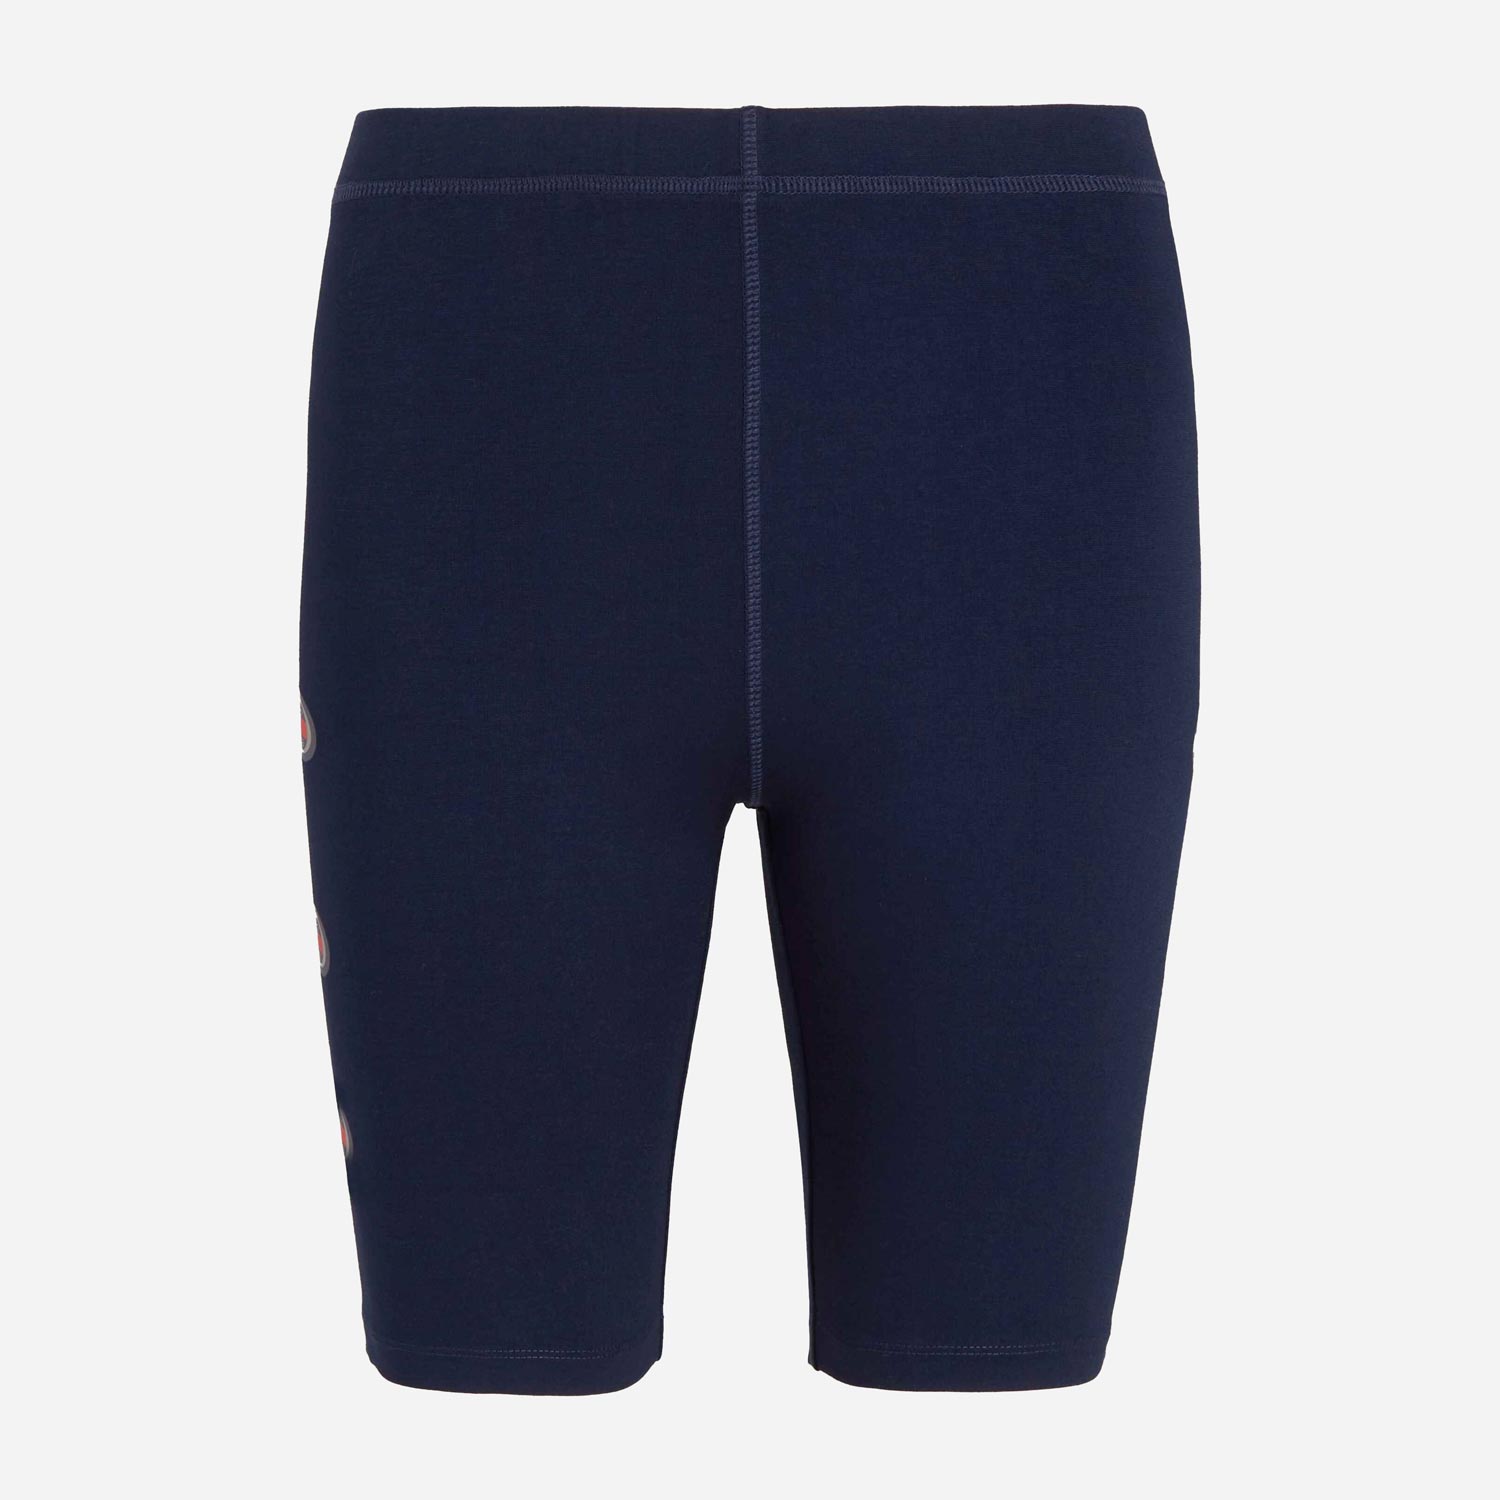 Tommy Jeans Womens Archive Cycle Short - Dark Night Navy